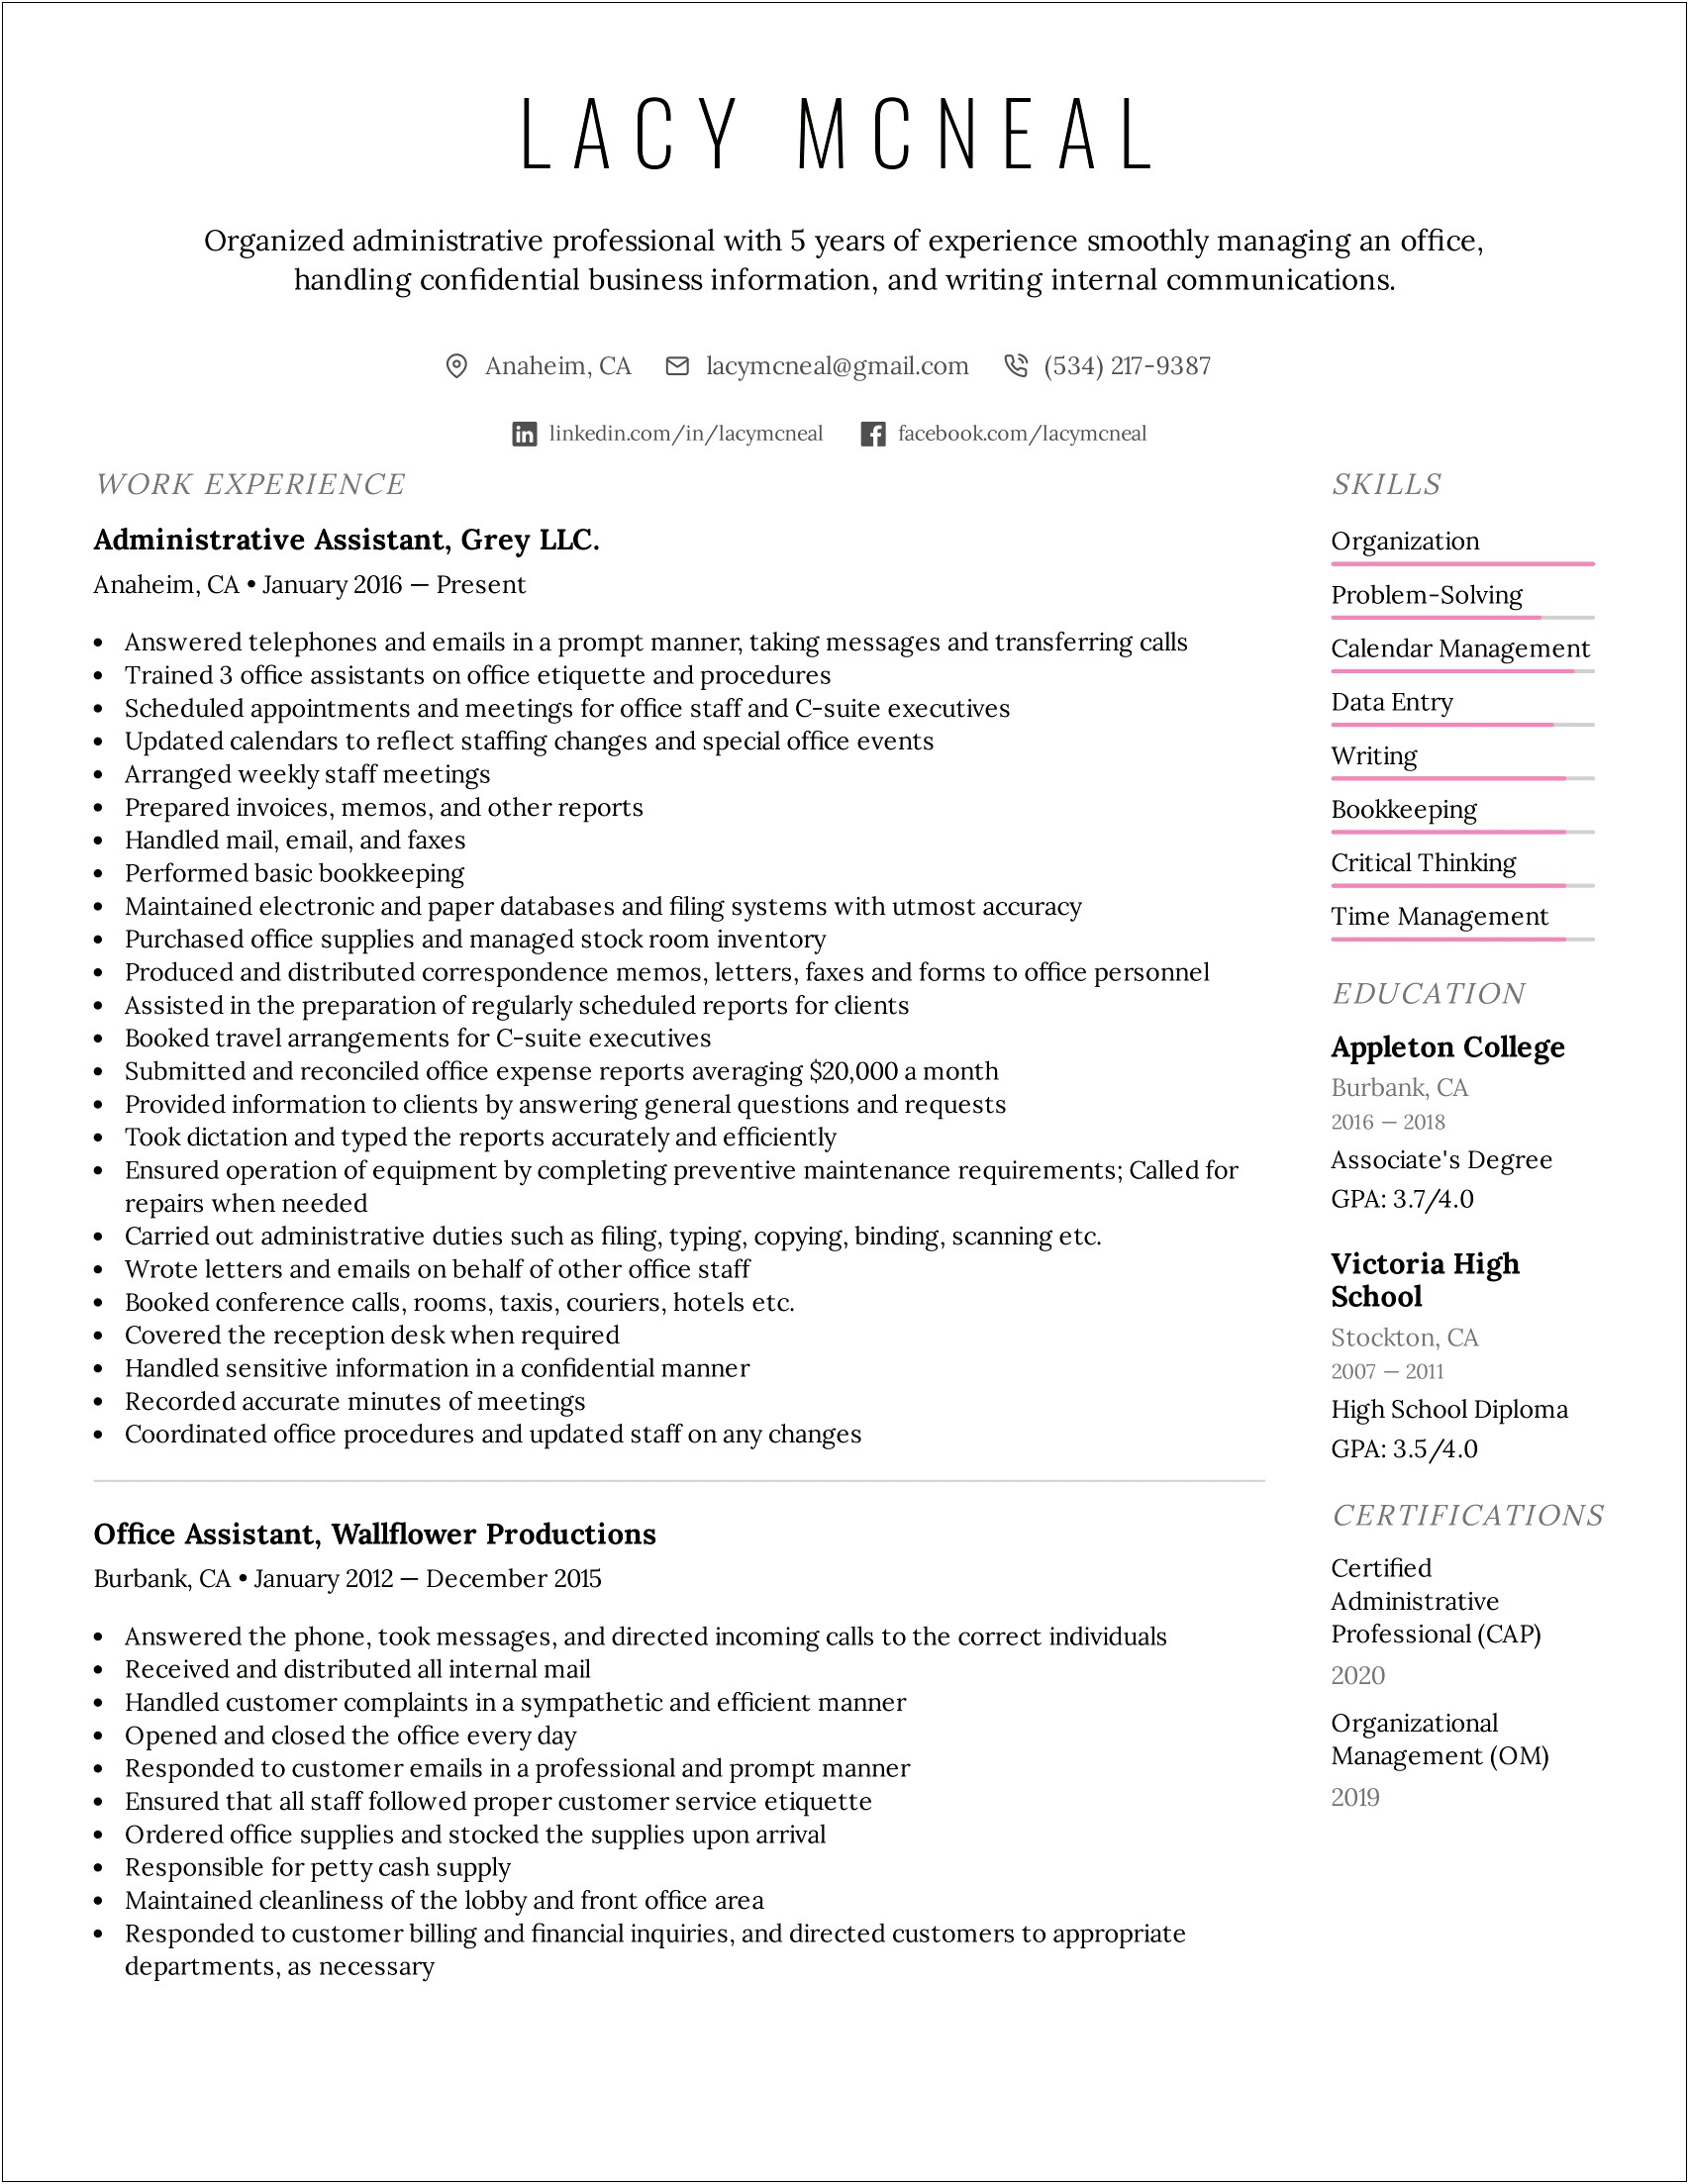 Administrative Assistant Resume 2018 Sample